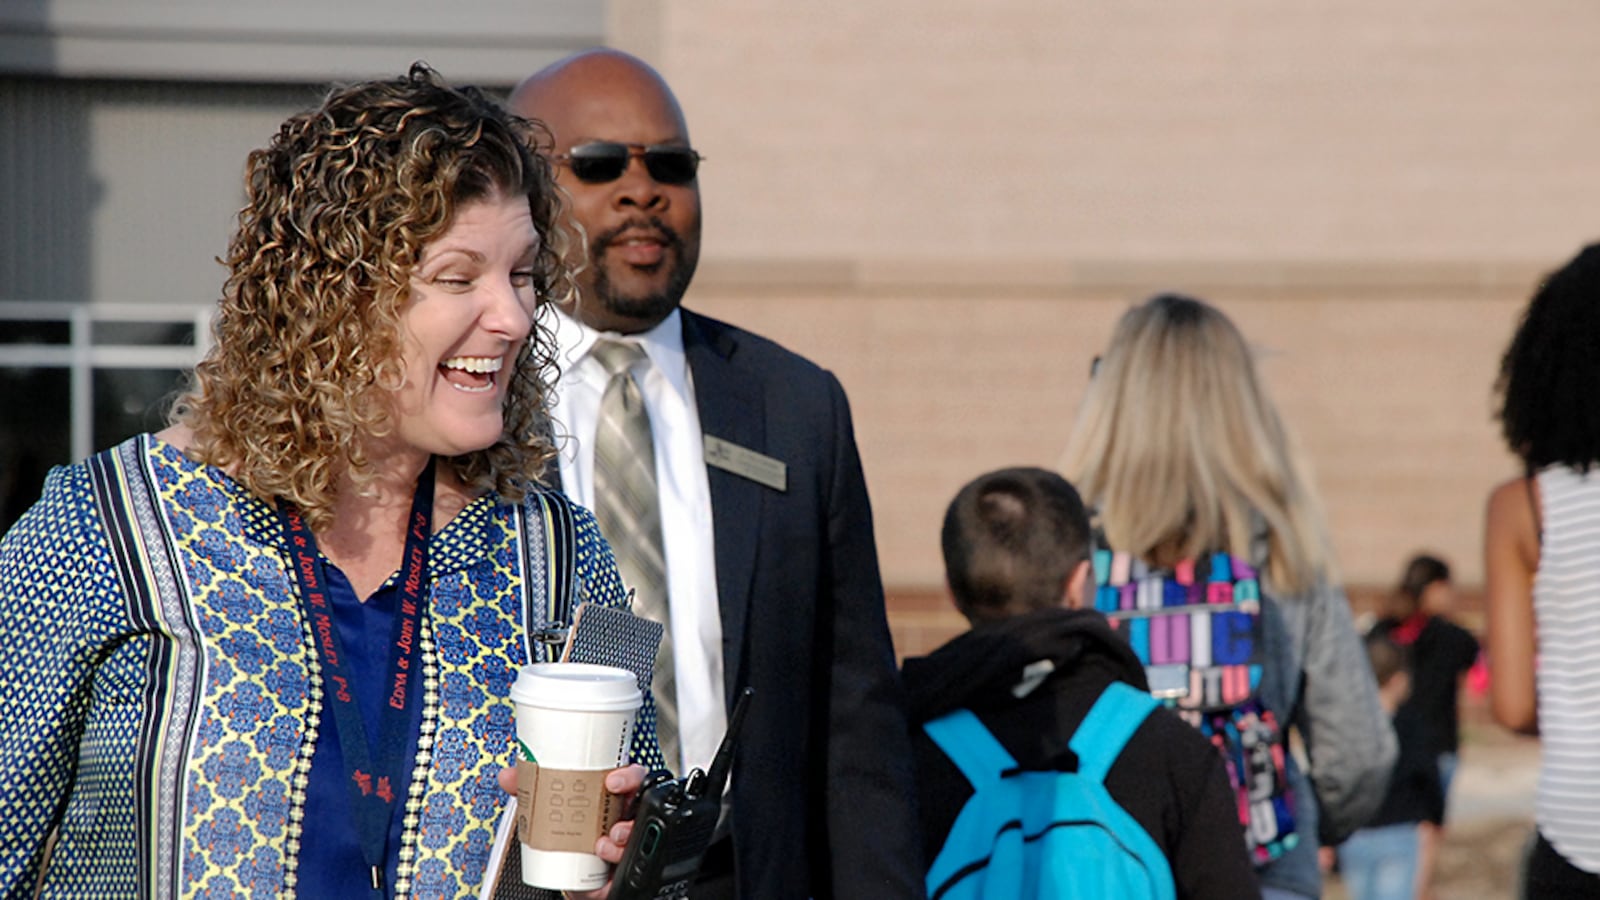 Principal Carrie Clark, left, and Superintendent Rico Munn greet students at the Edna and John W. Mosley P-8 school Monday, the first day of school for most students at the new school.